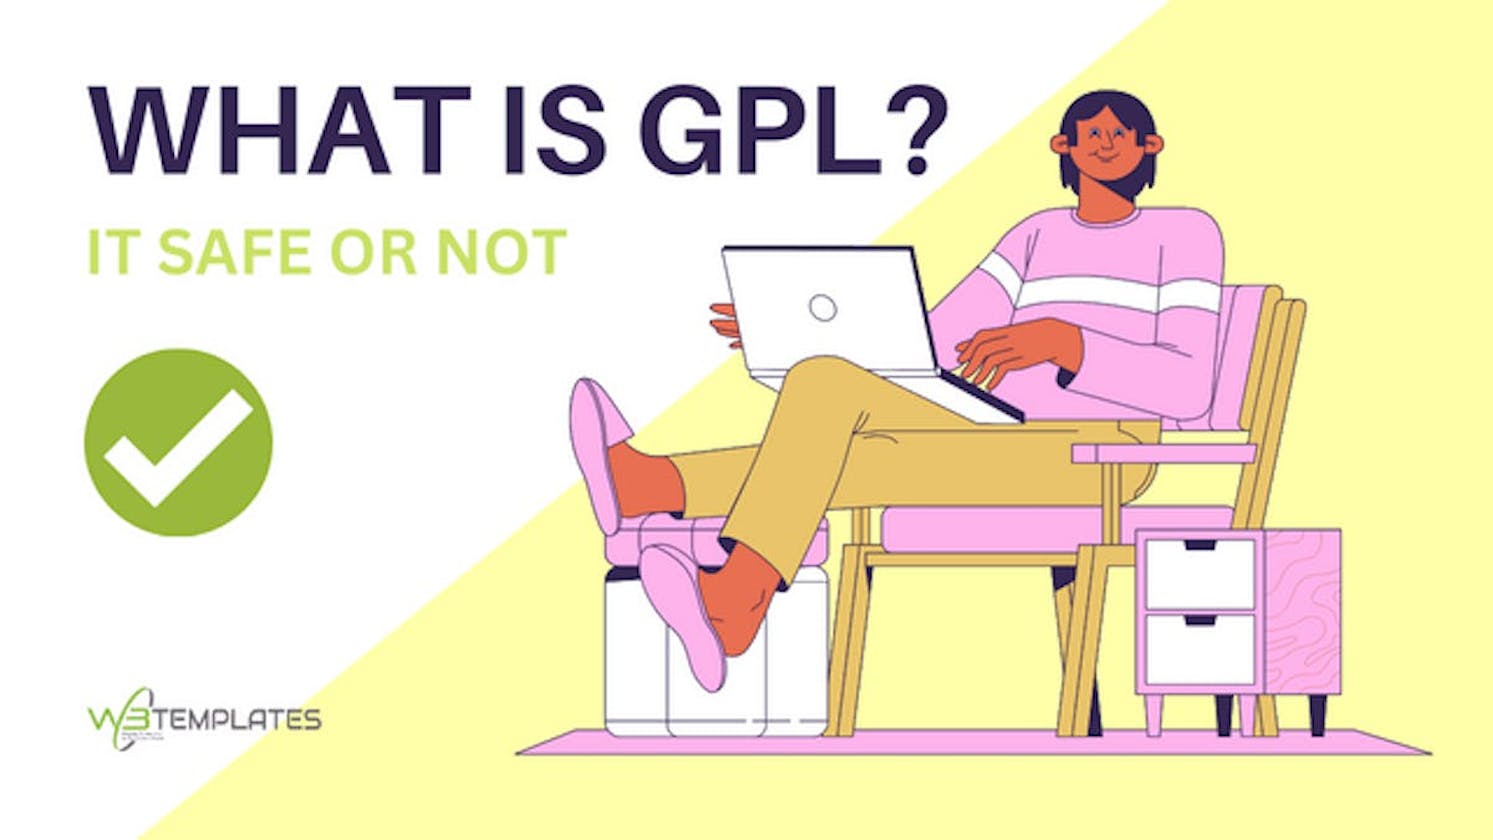 What is GPL?